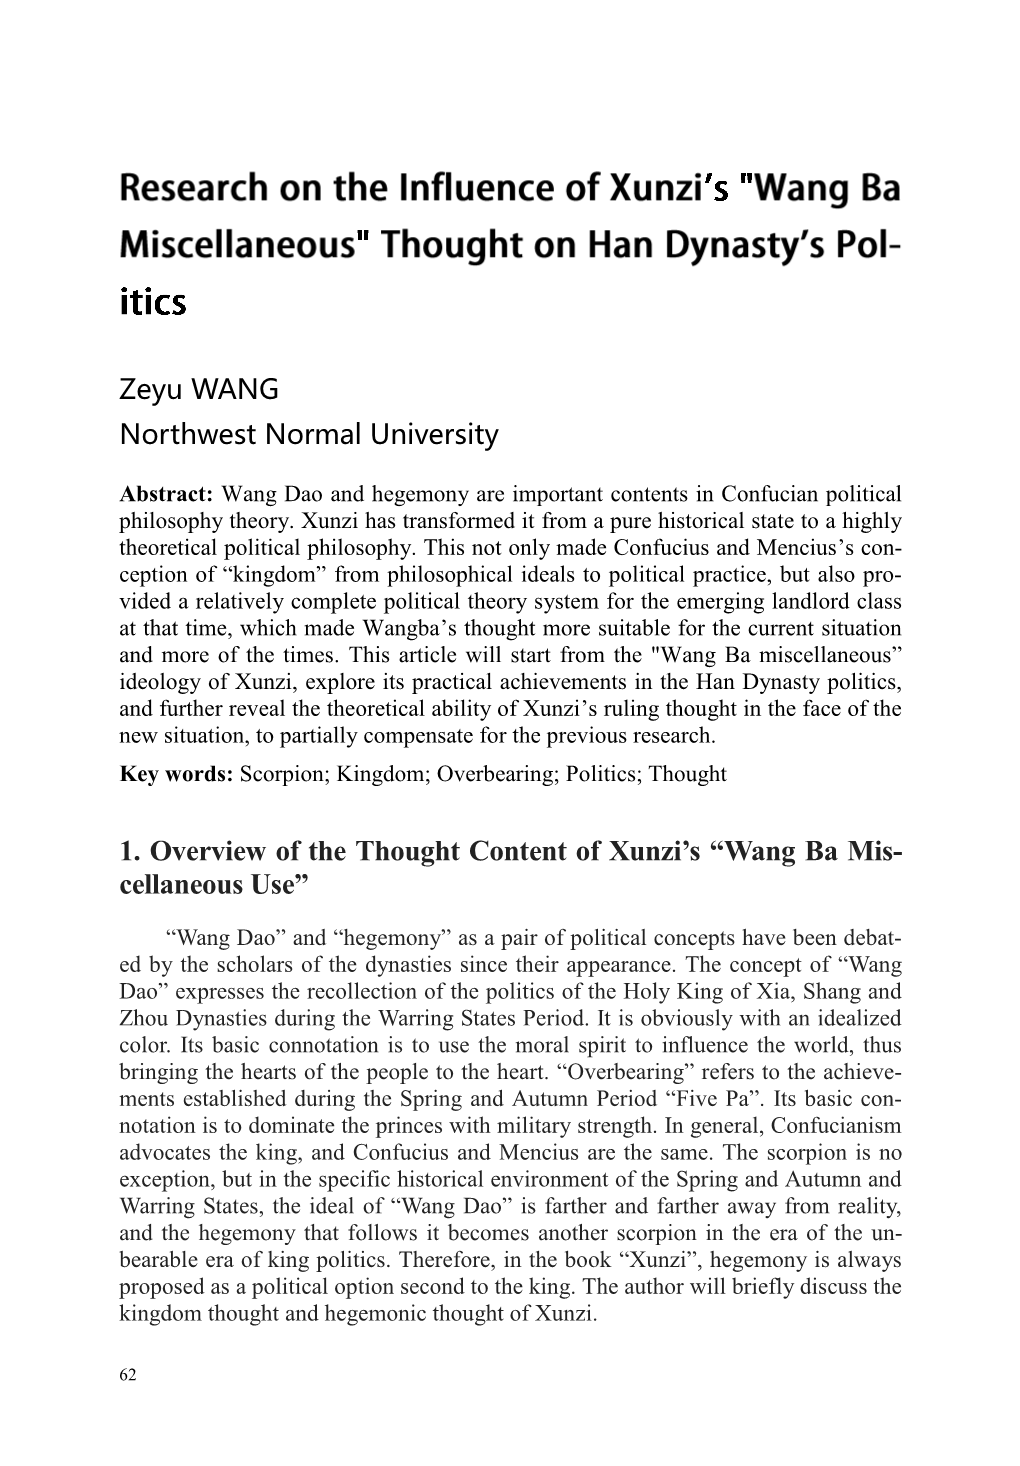 1. Overview of the Thought Content of Xunzi's “Wang Ba Mis- Cellaneous